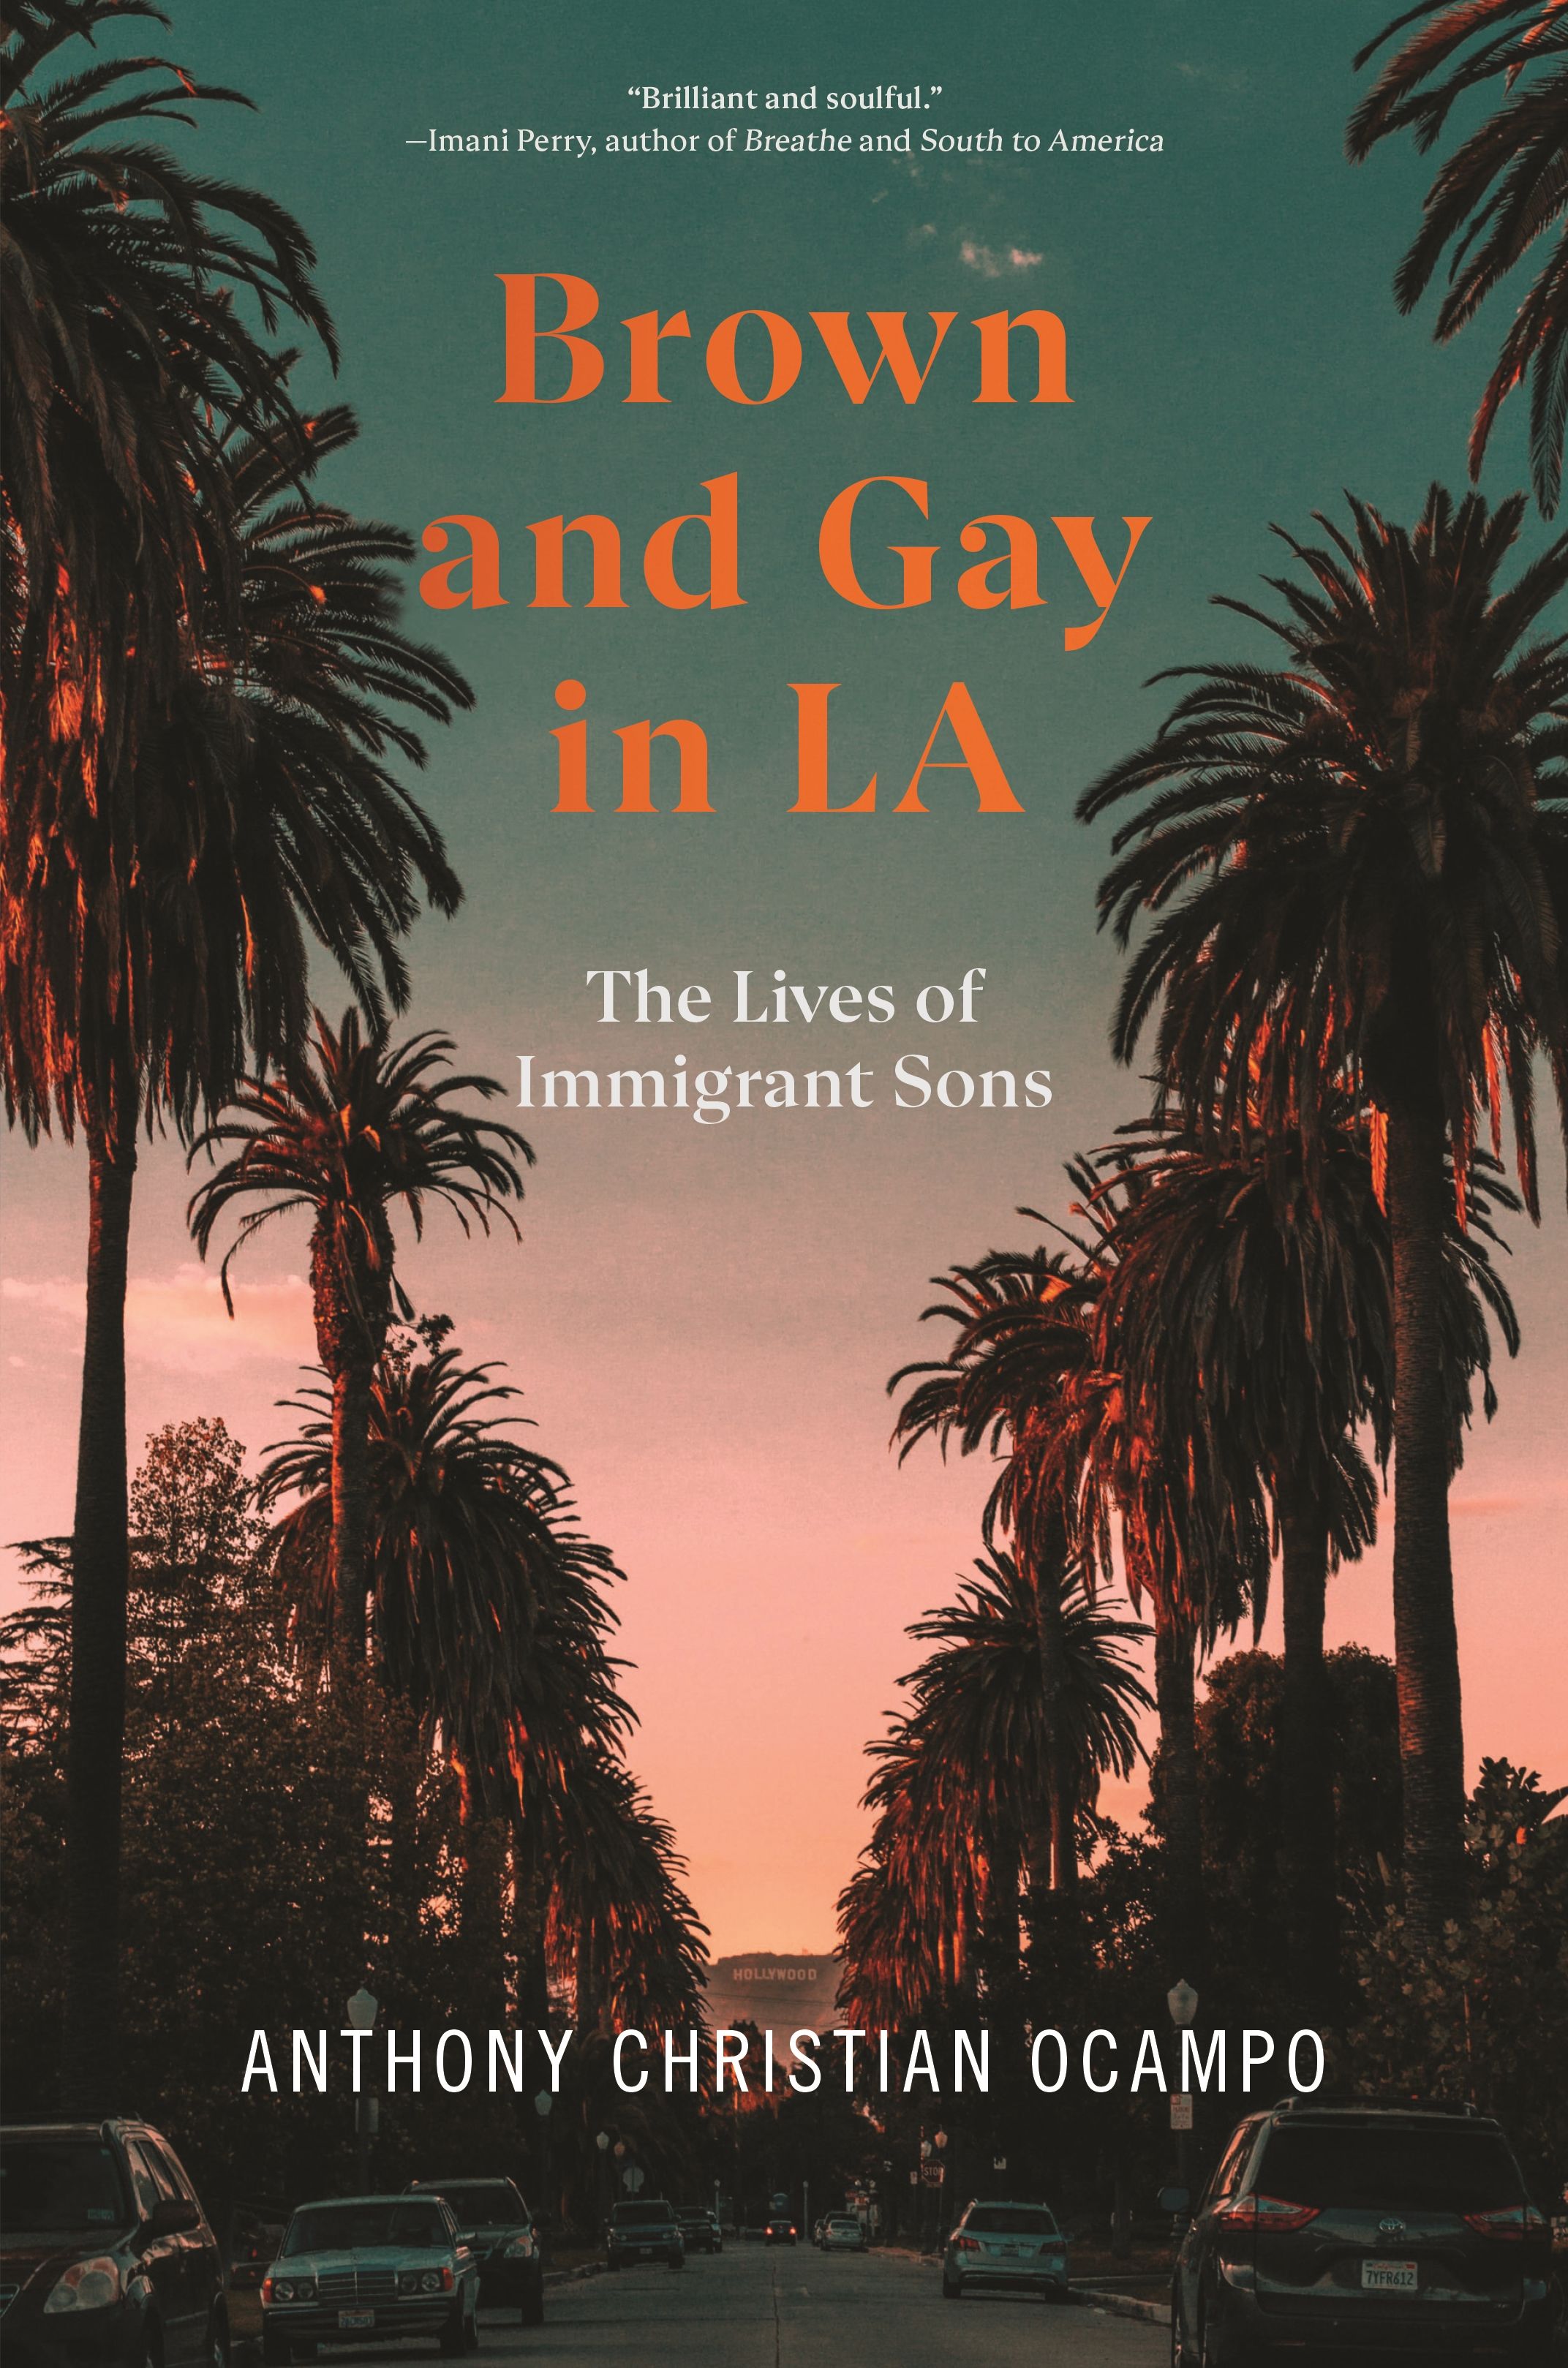 Brown and Gay in LA by: Anthony Christian Ocampo